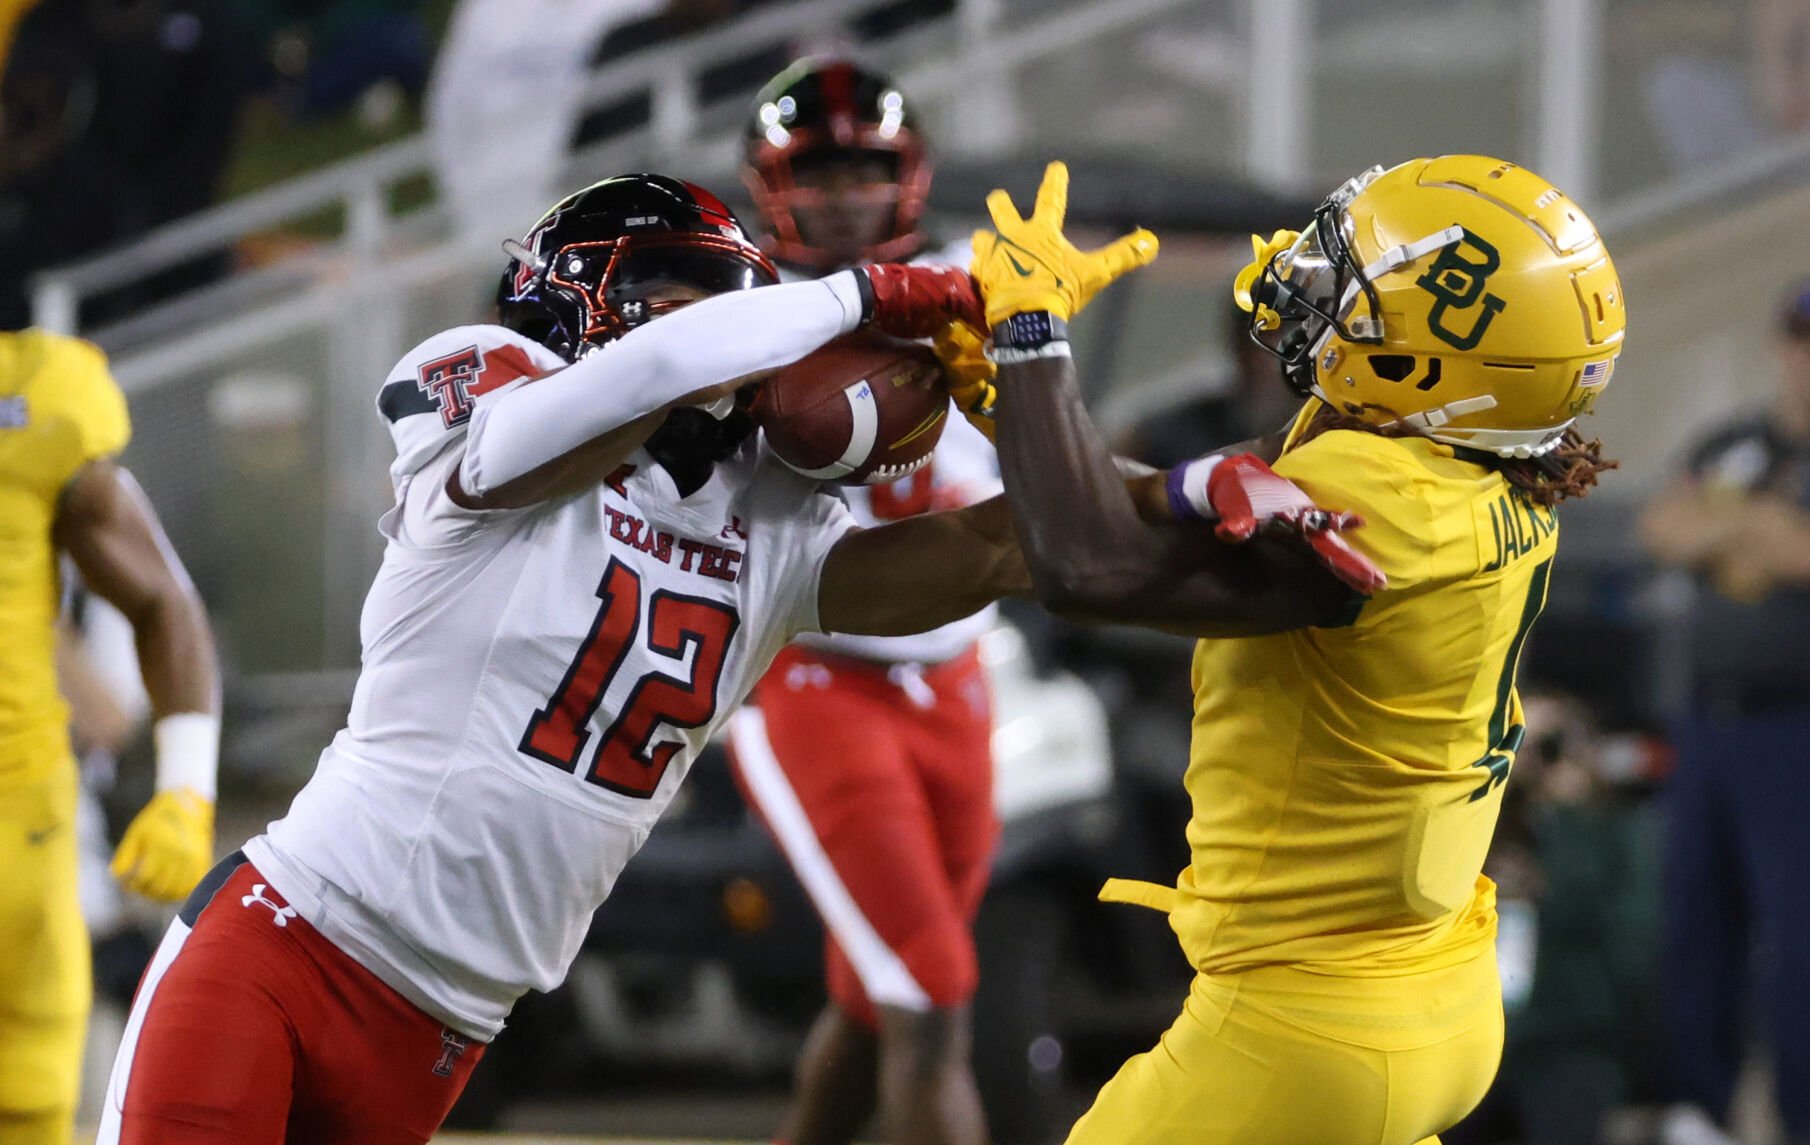 Technical difficulties — Red Raiders manhandle Bears, 39-14, in